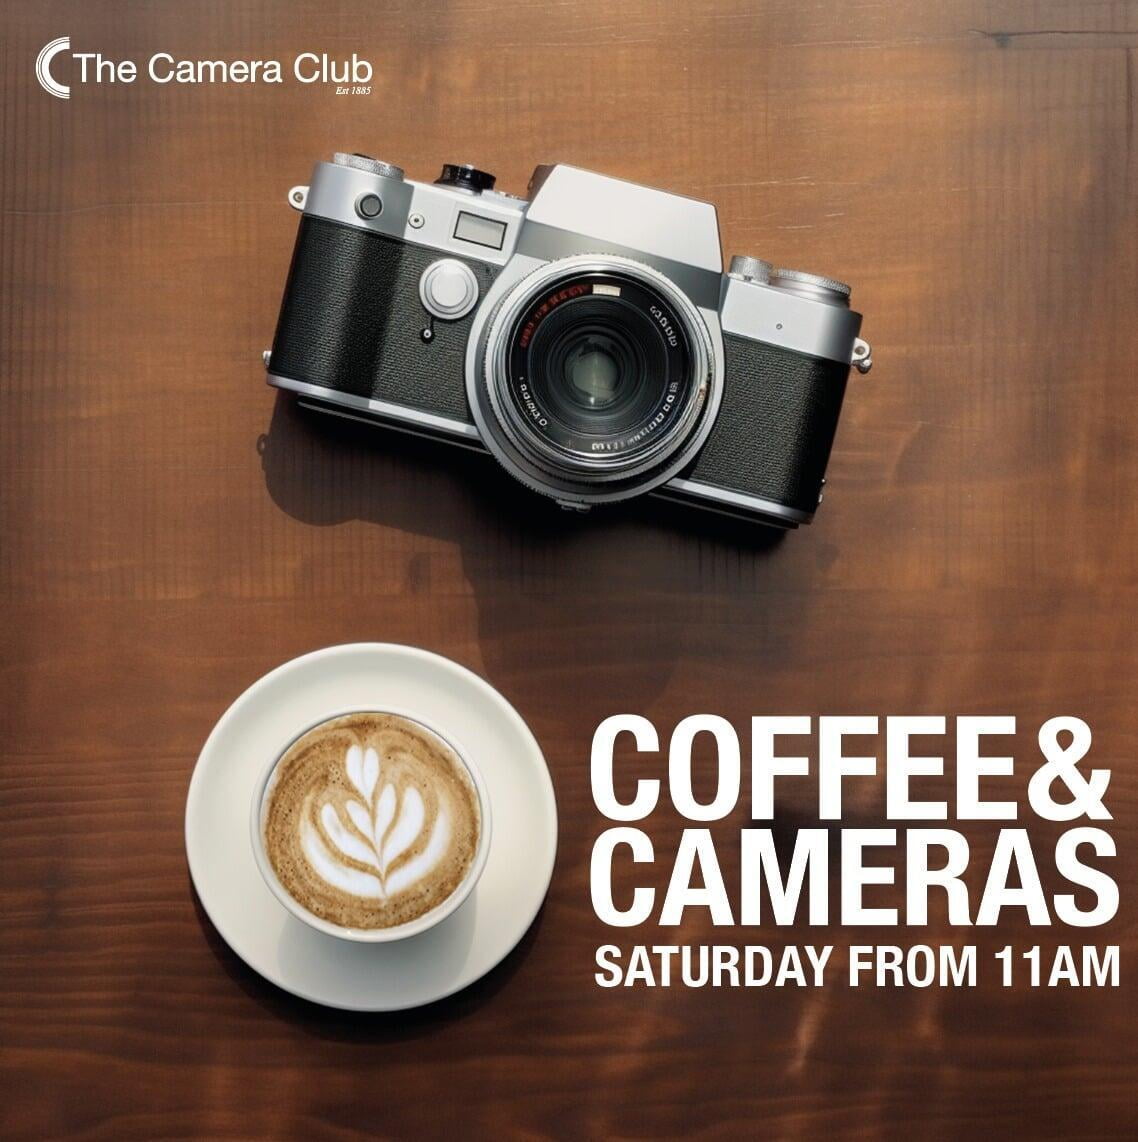 The Camera Club Meetups, open to the public